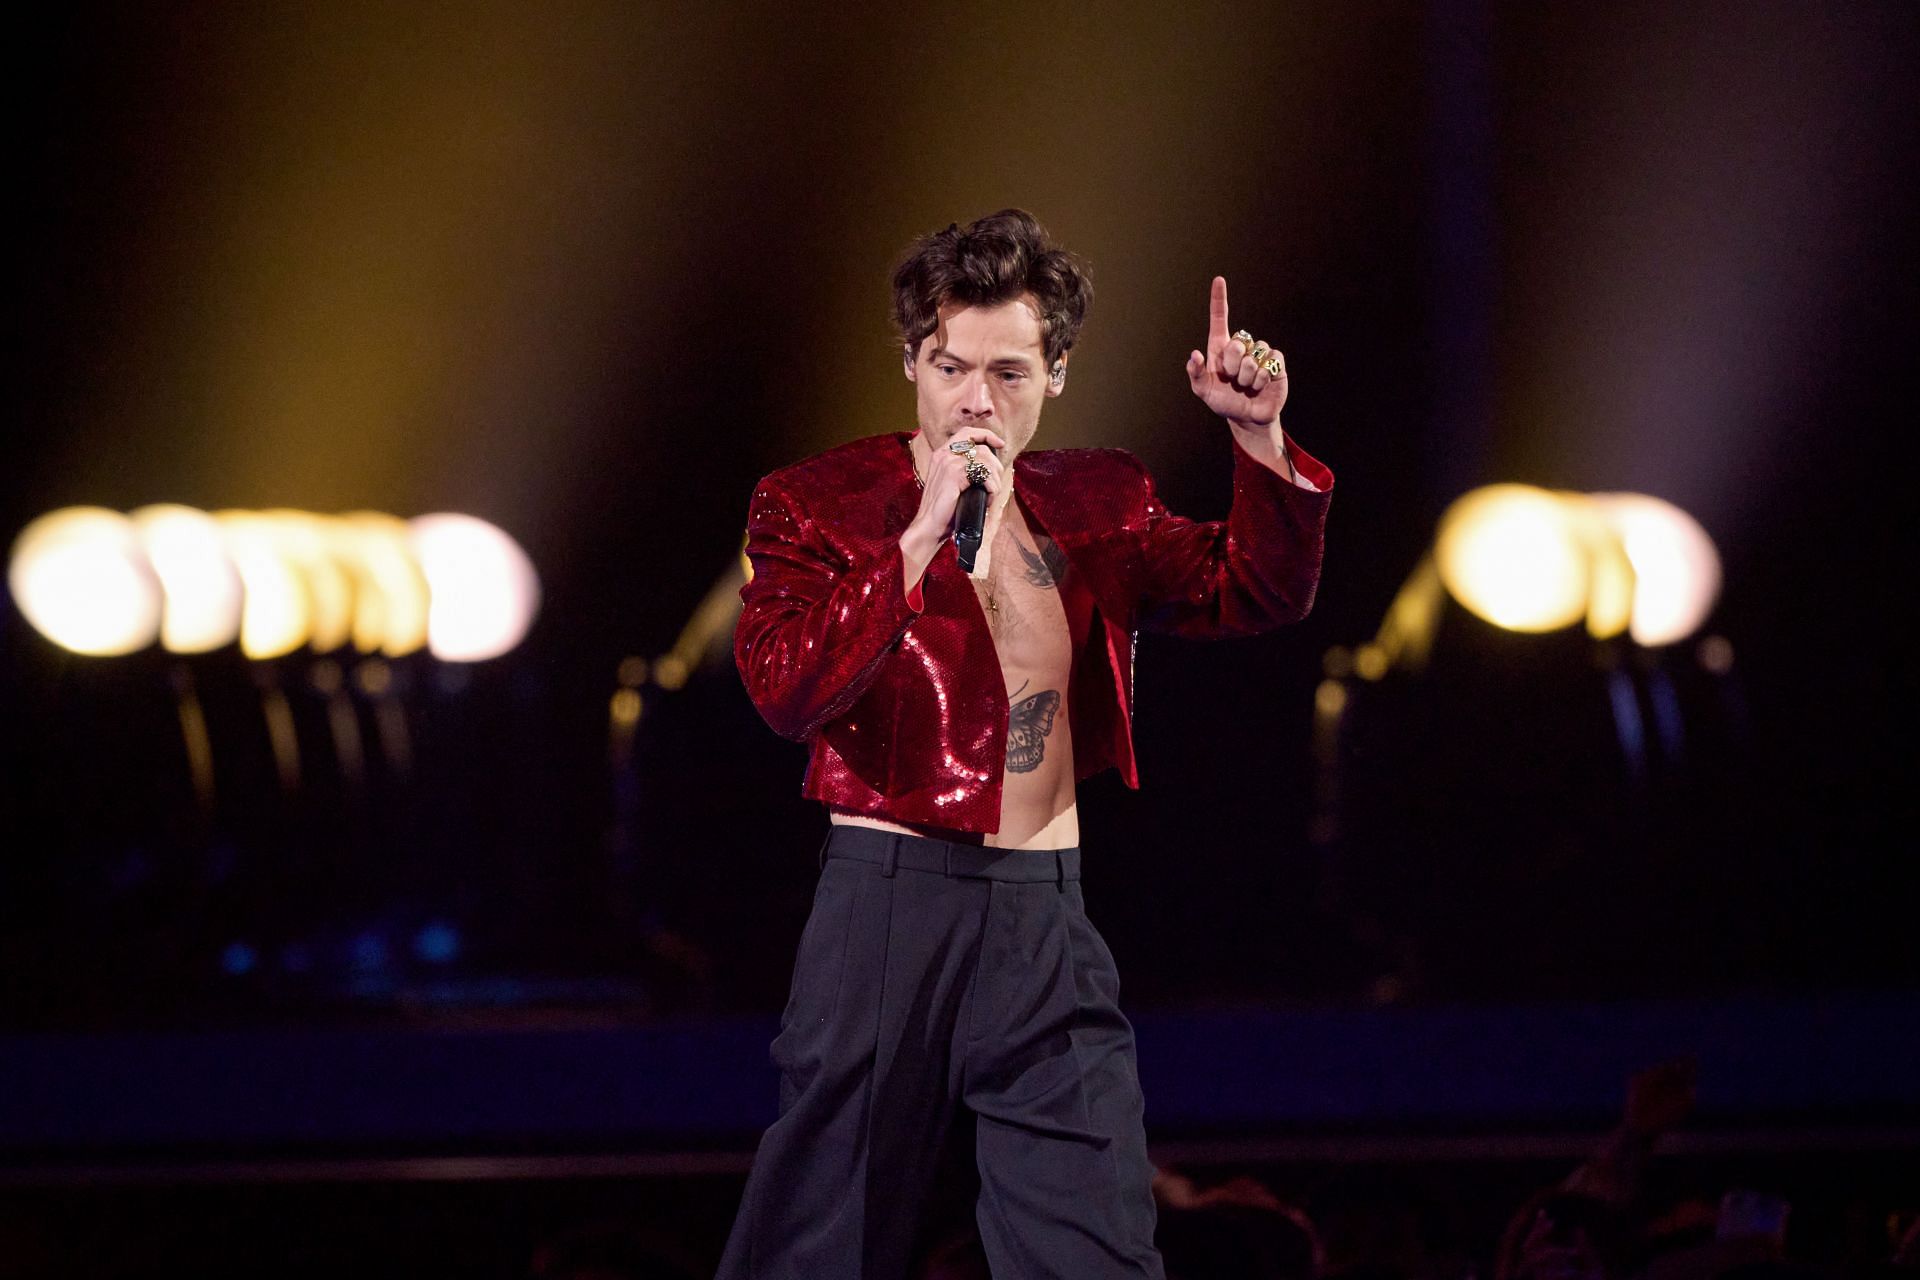 Harry Styles at the 2023 BRIT Awards (via Getty/Gareth Cattermole)